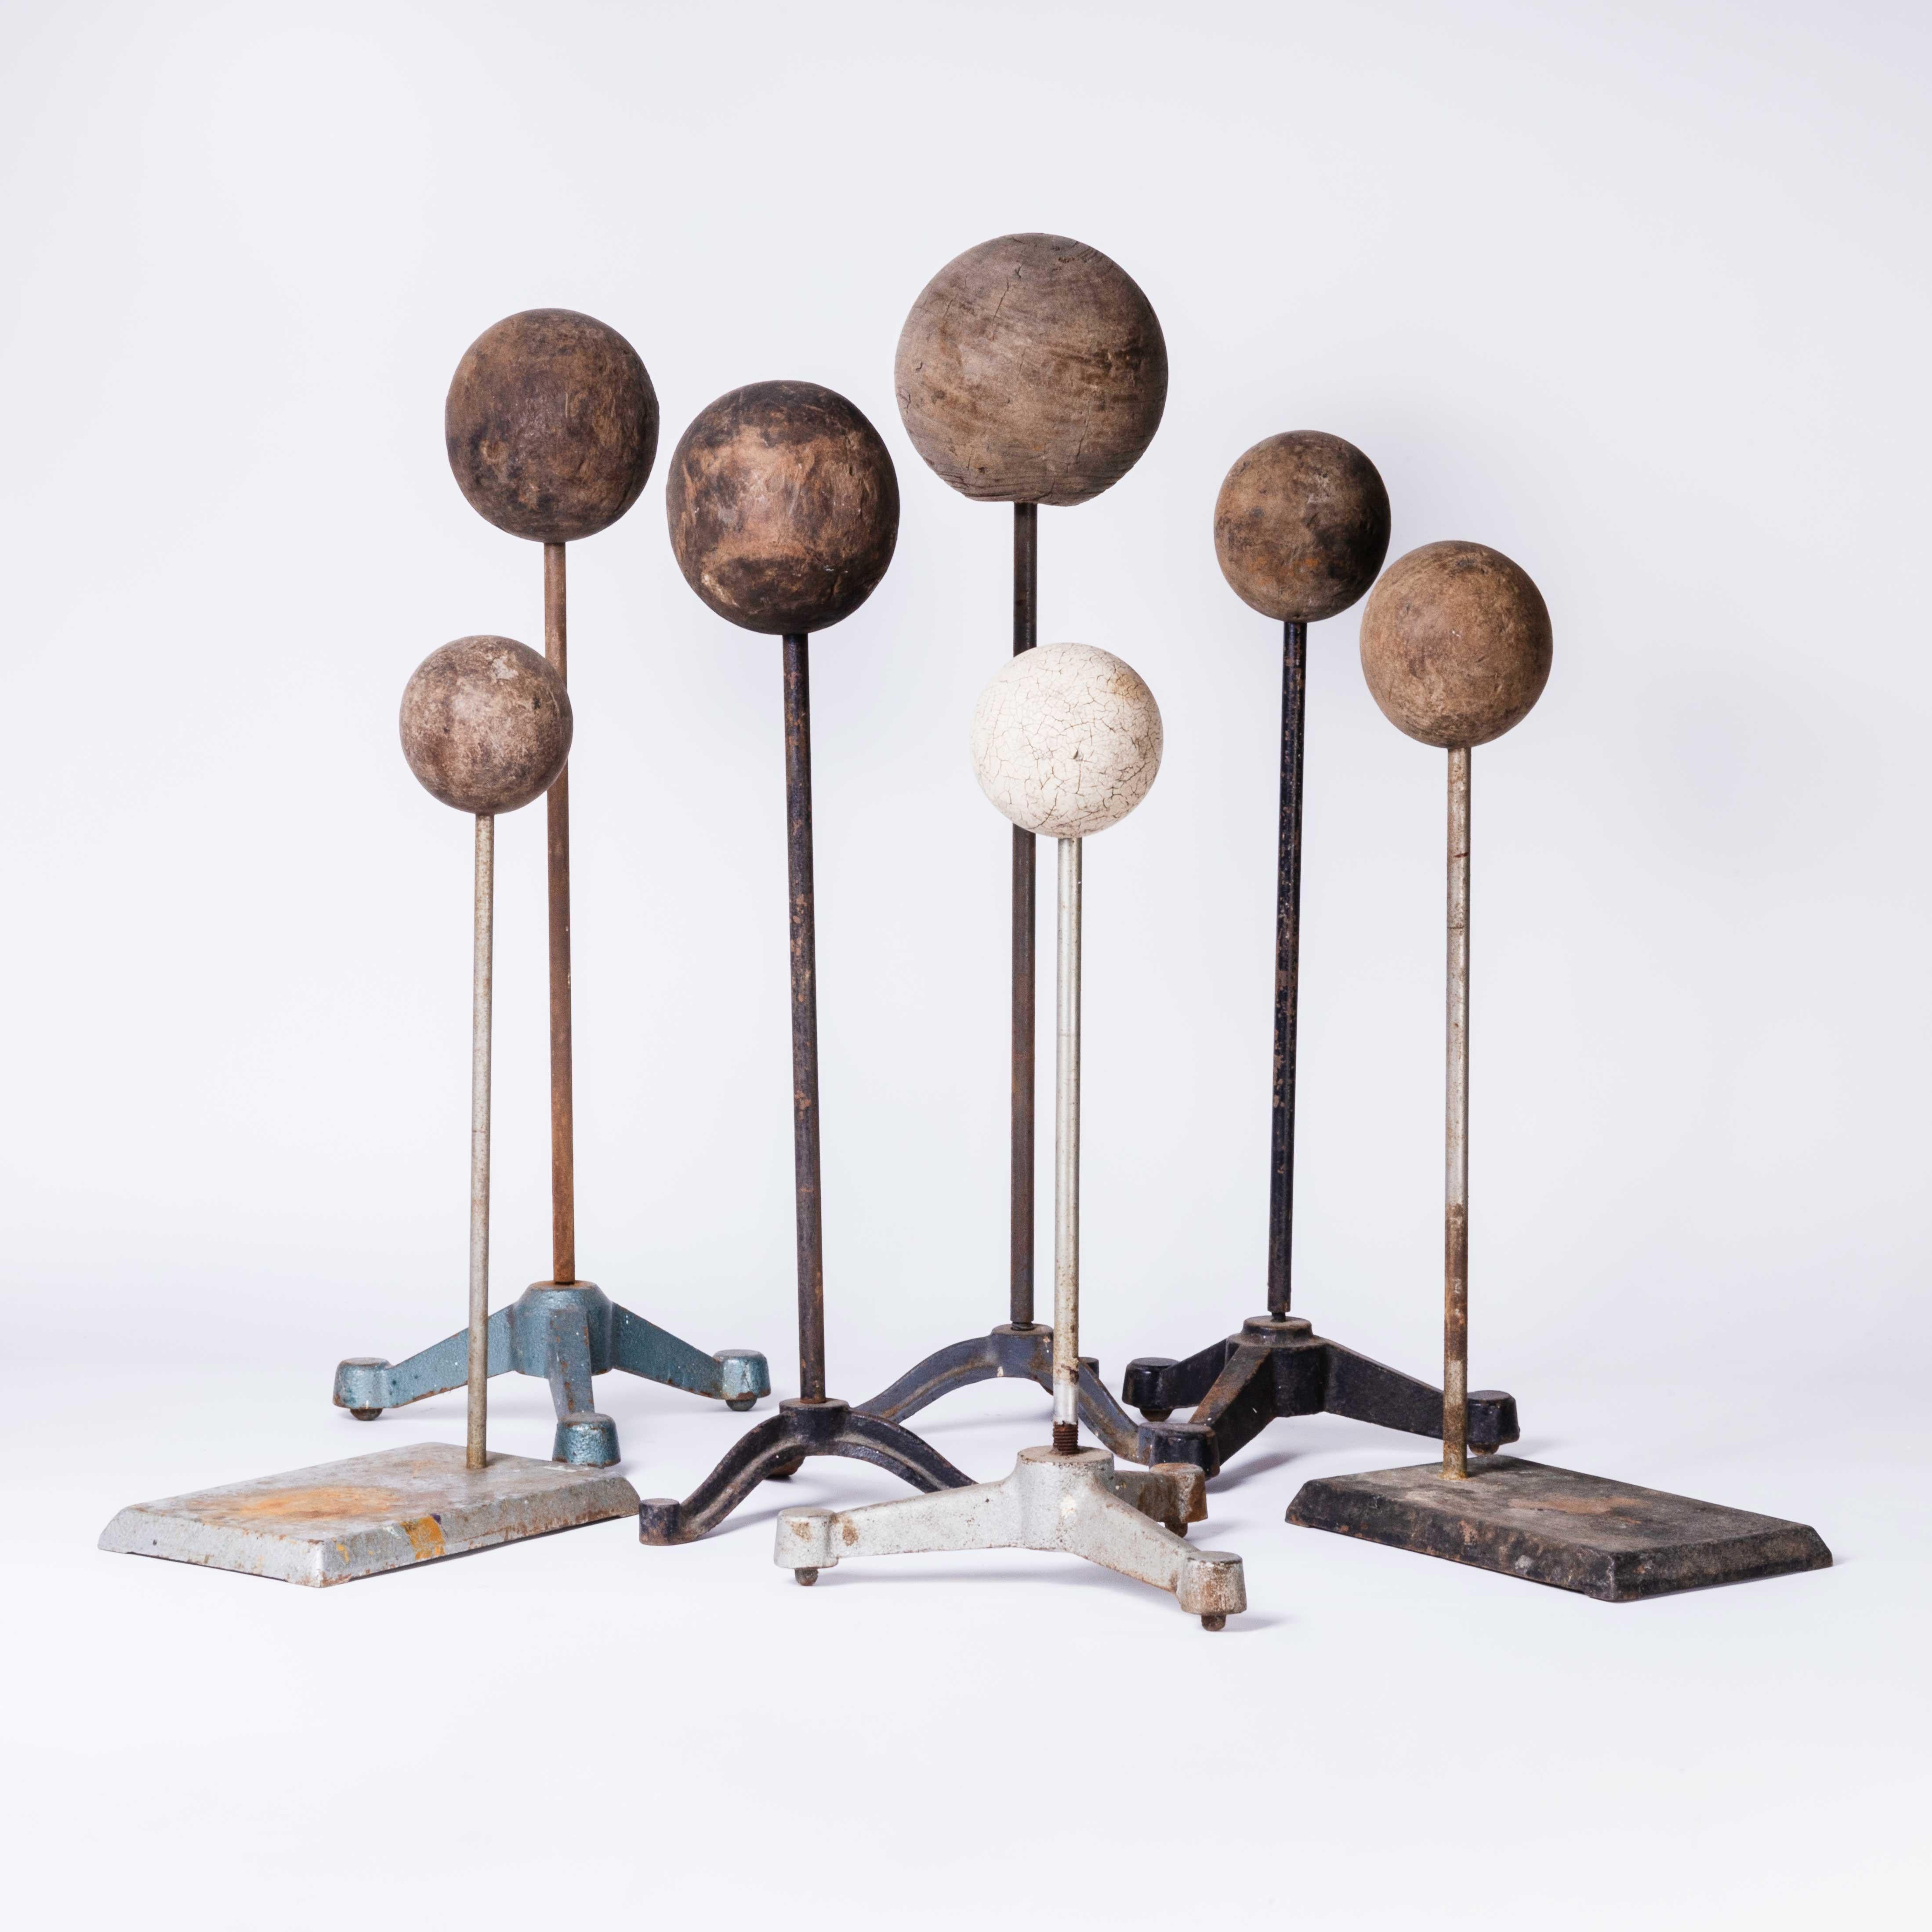 Set of Wooden vintage juggling balls
Set of Wooden vintage juggling balls. The juggling balls have recently been mounted on old laboratory stands to create a decorative collection.

WORKSHOP REPORT
Our workshop team inspect every product and